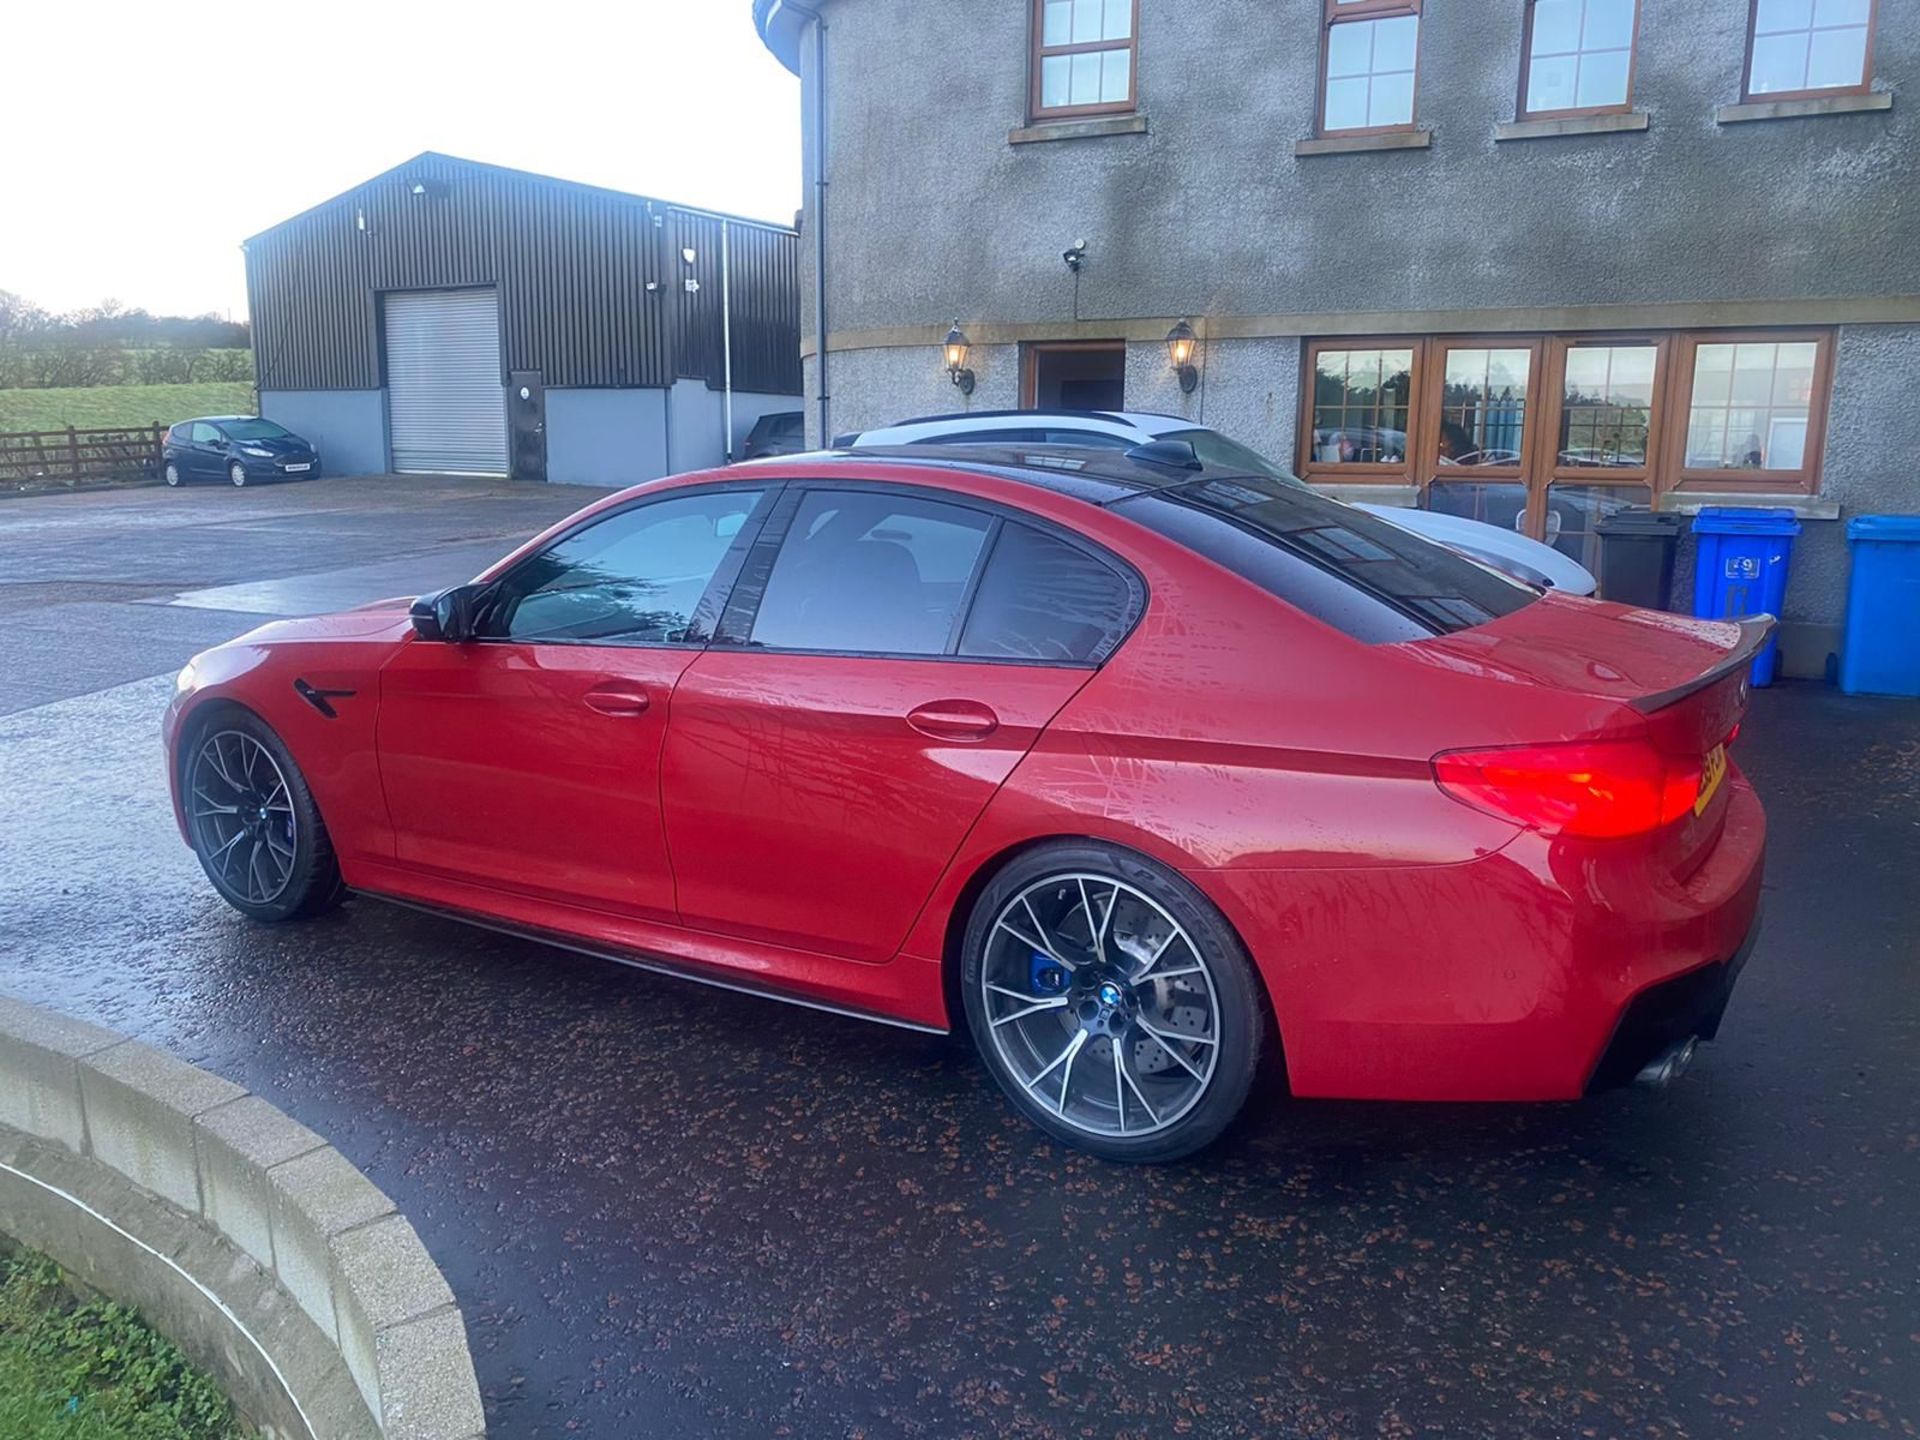 2019 BMW M5 COMPETITION AUTO RED SALOON, 18K MILES, SPECIAL ORDER RED, ONLY 4 IN THE UK *NO VAT* - Image 3 of 8